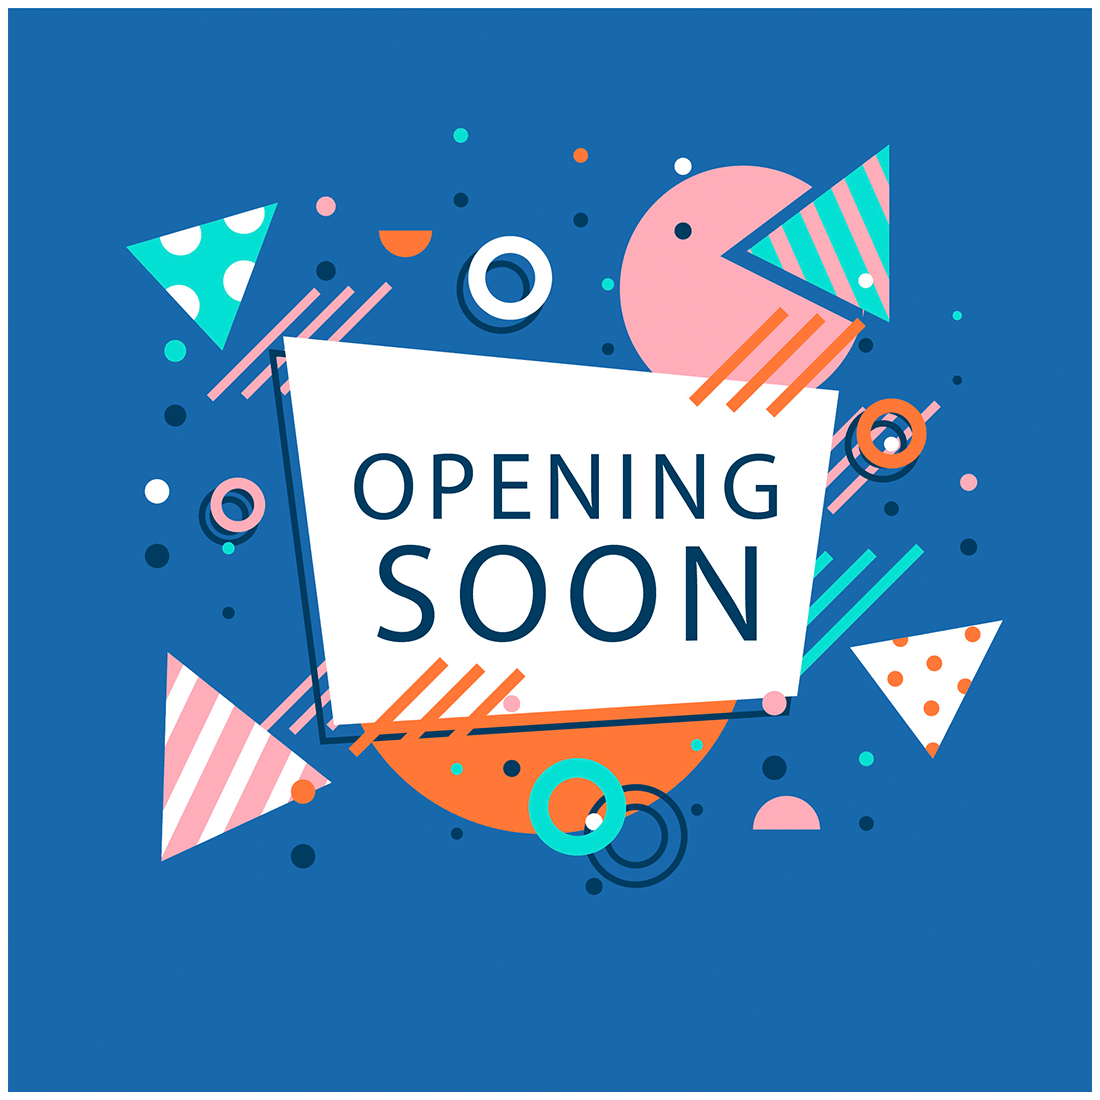 OPENING SOON ILLUSTRATION cover image.